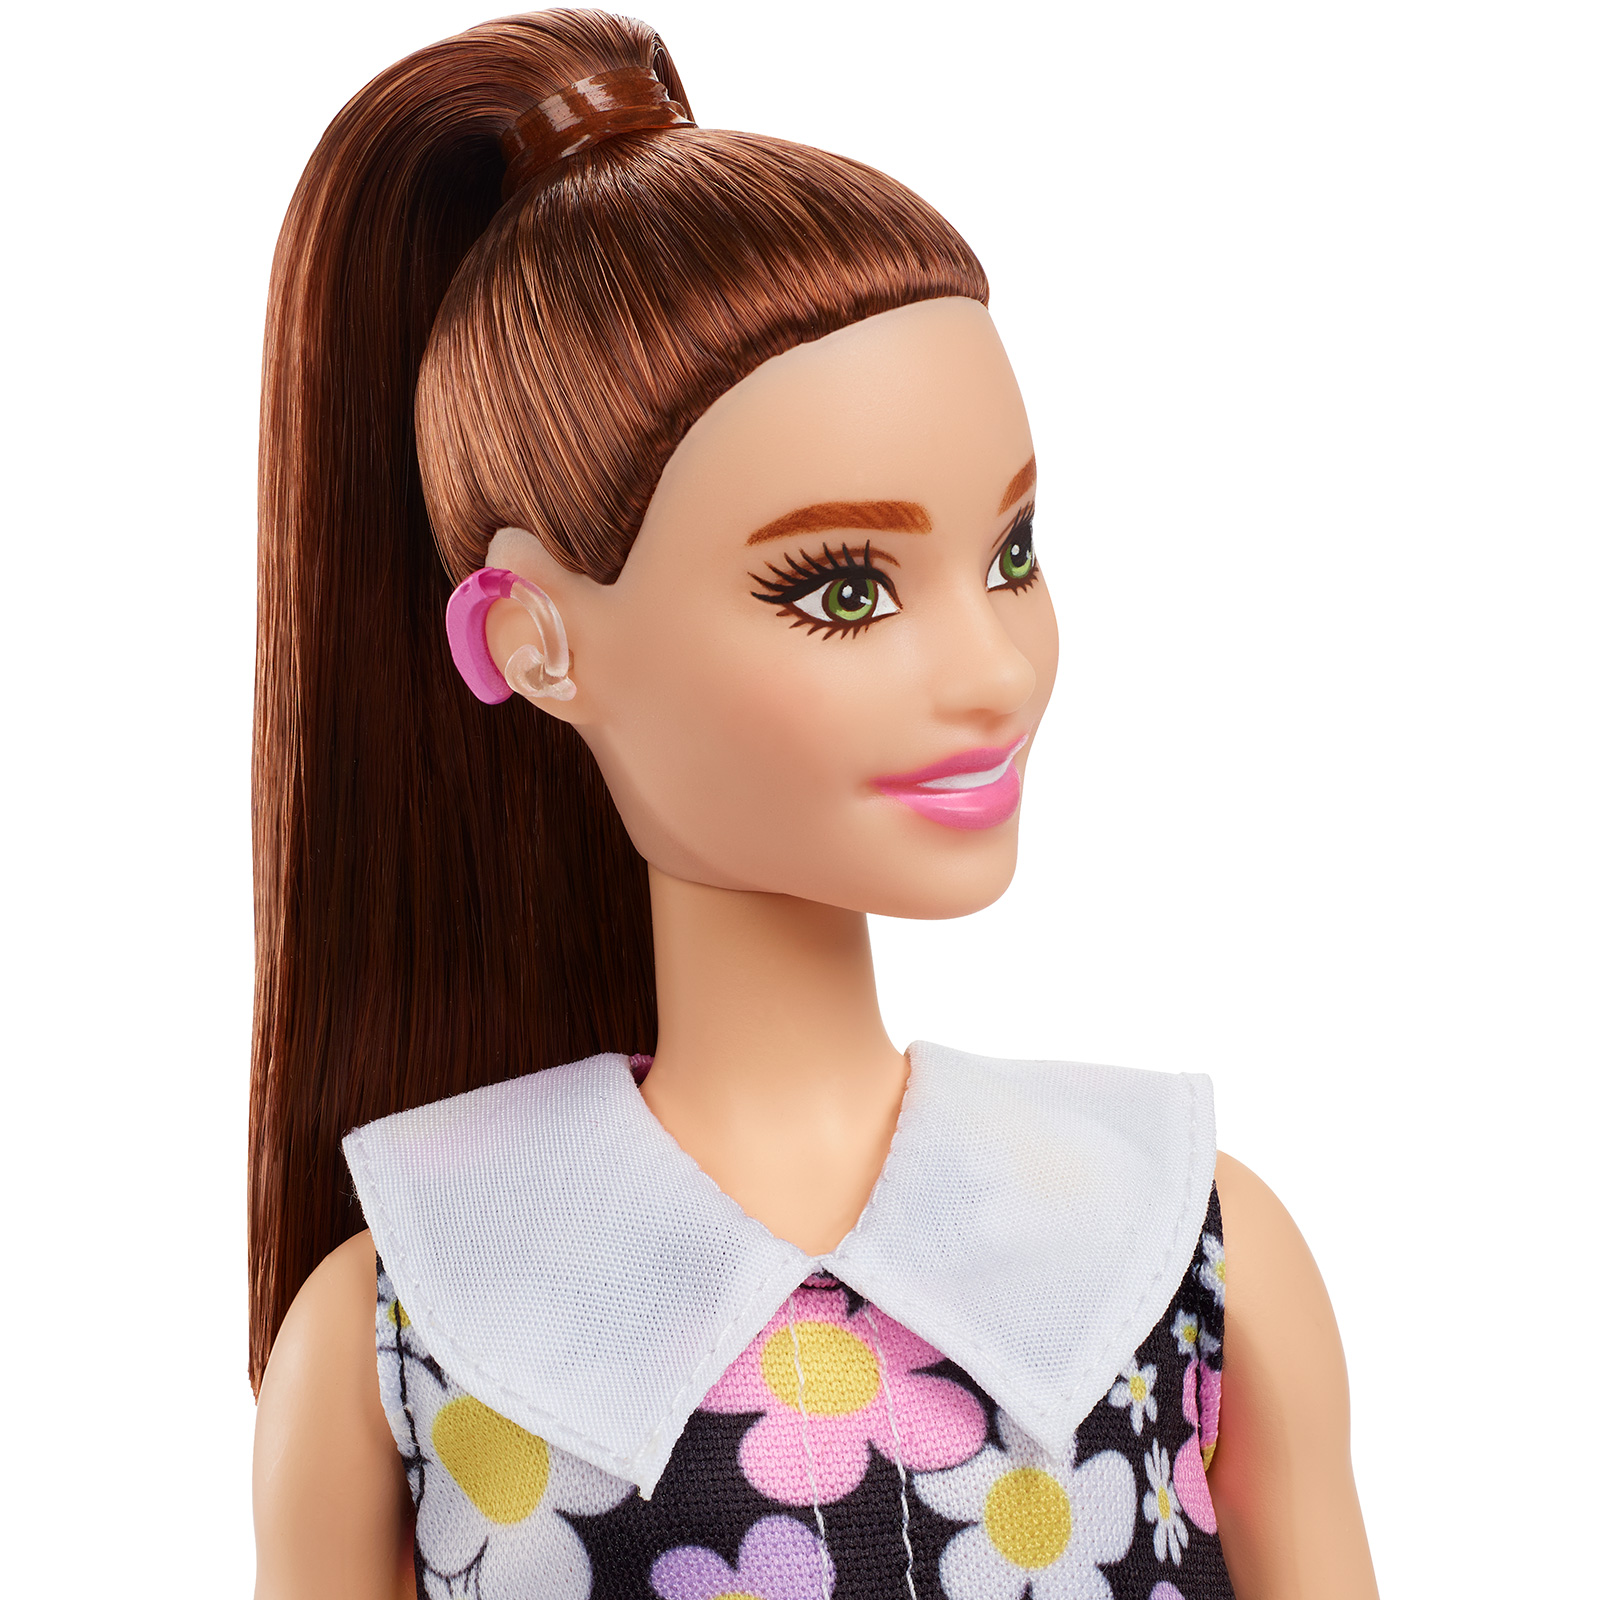 Barbie unveils its first-ever doll with hearing aids - CNN Style